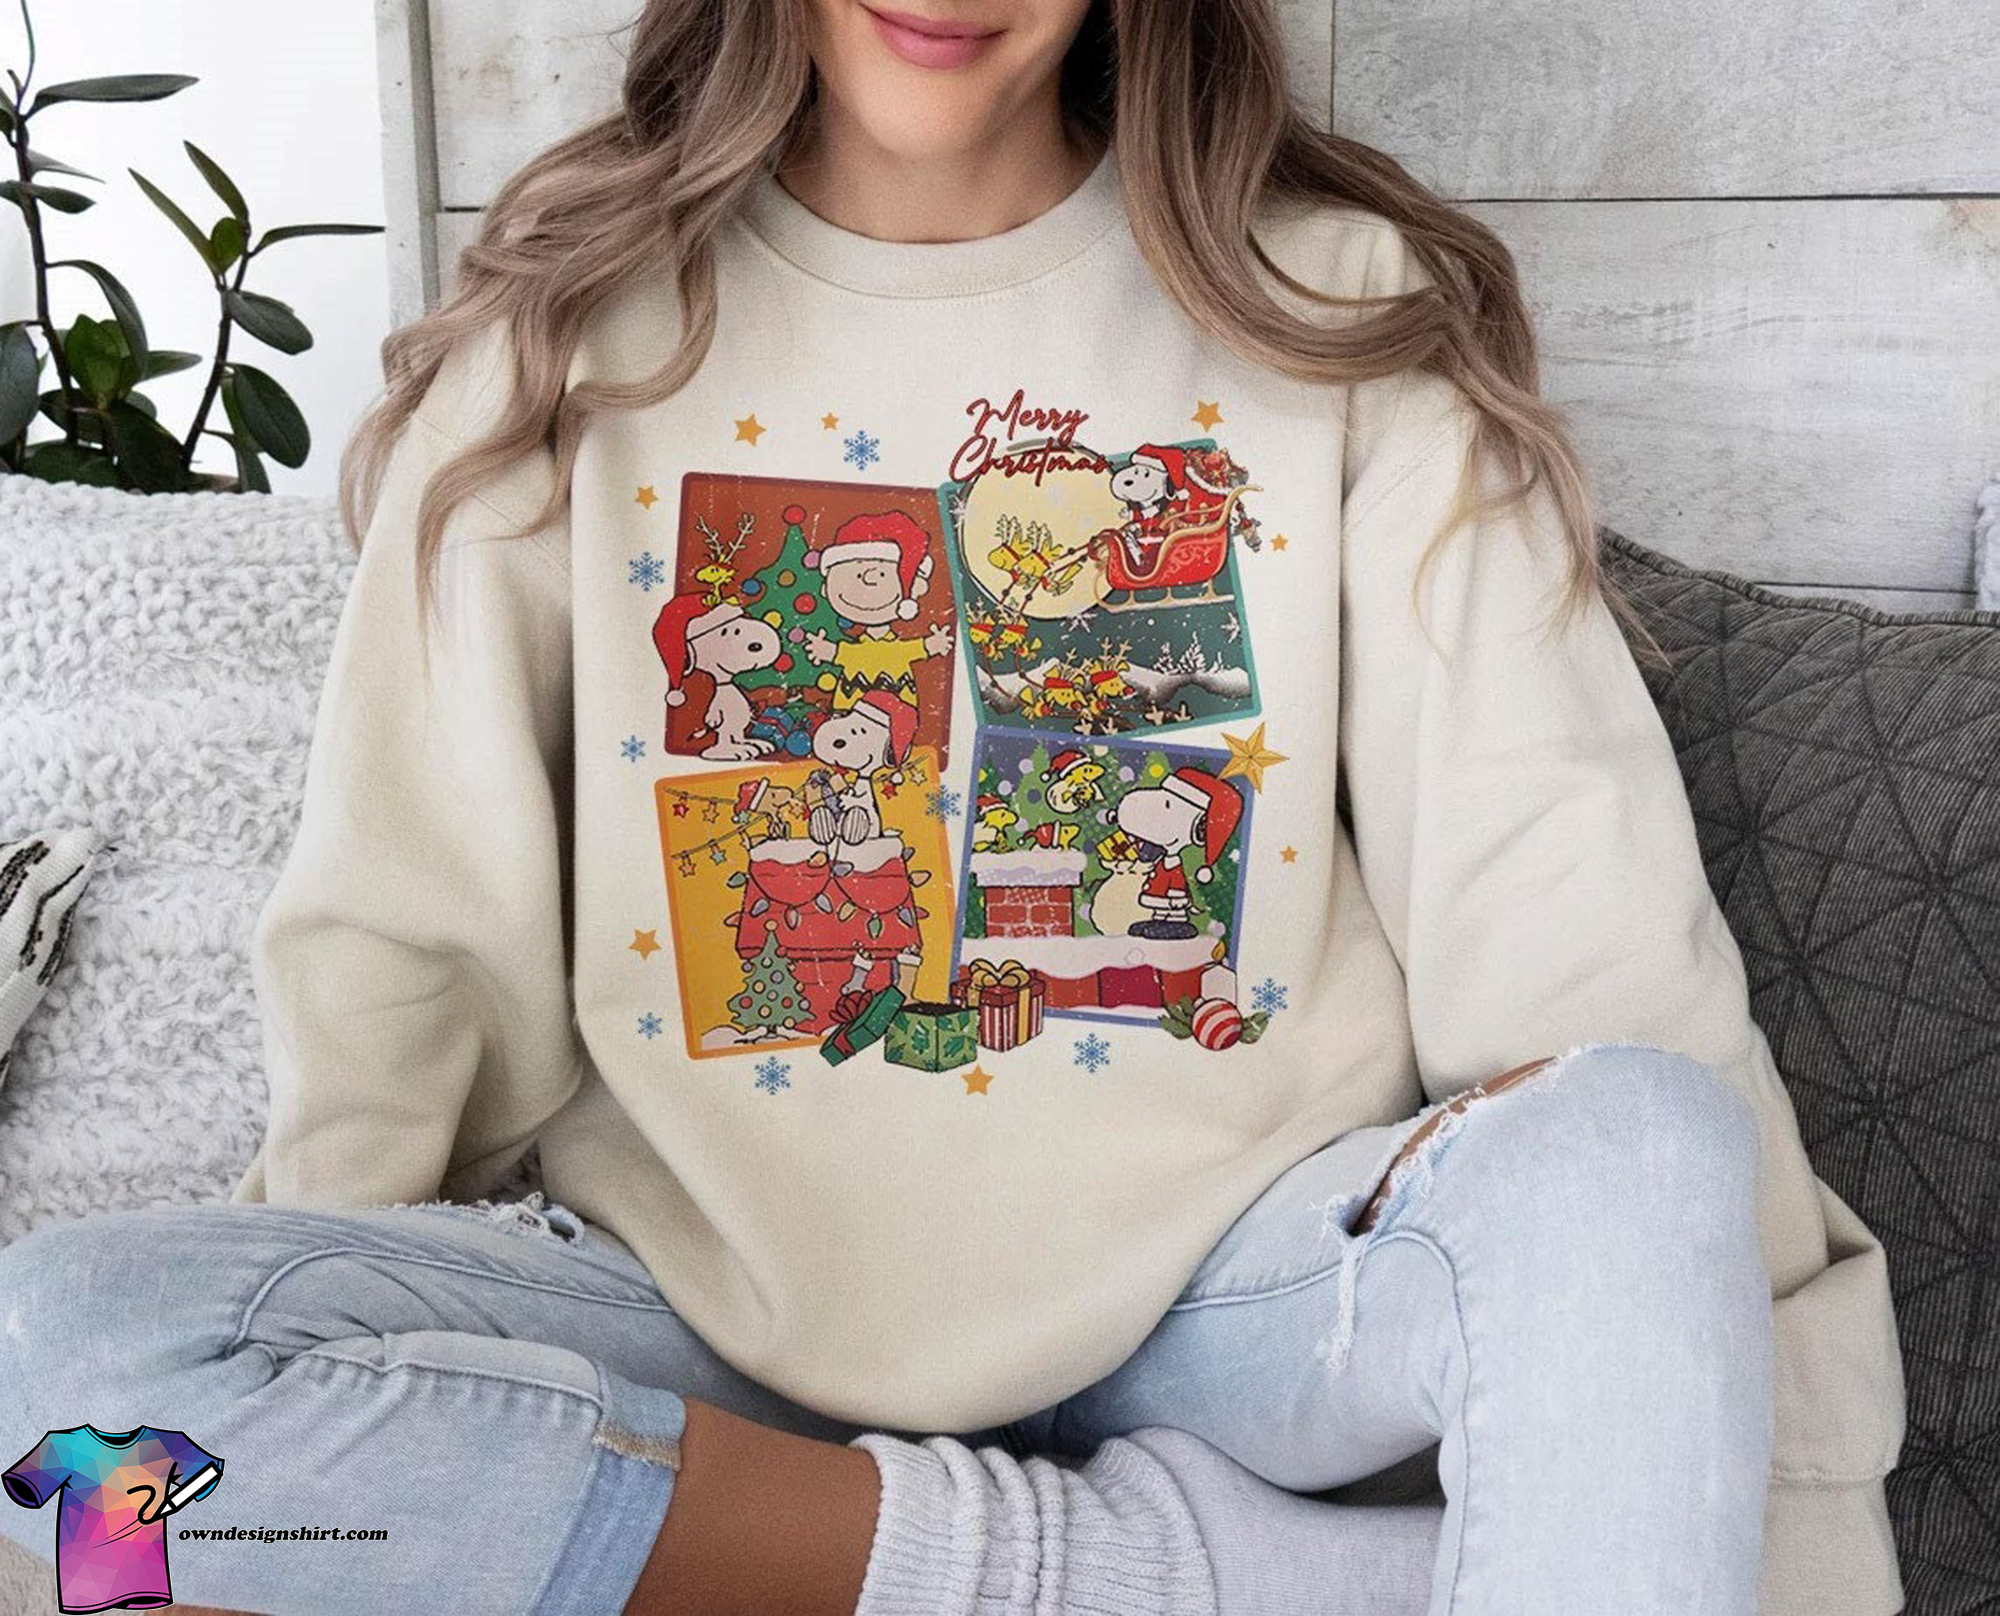 Classic Comfort The Charlie Brown Christmas Sweater - A Perfect Gift for the Holidays